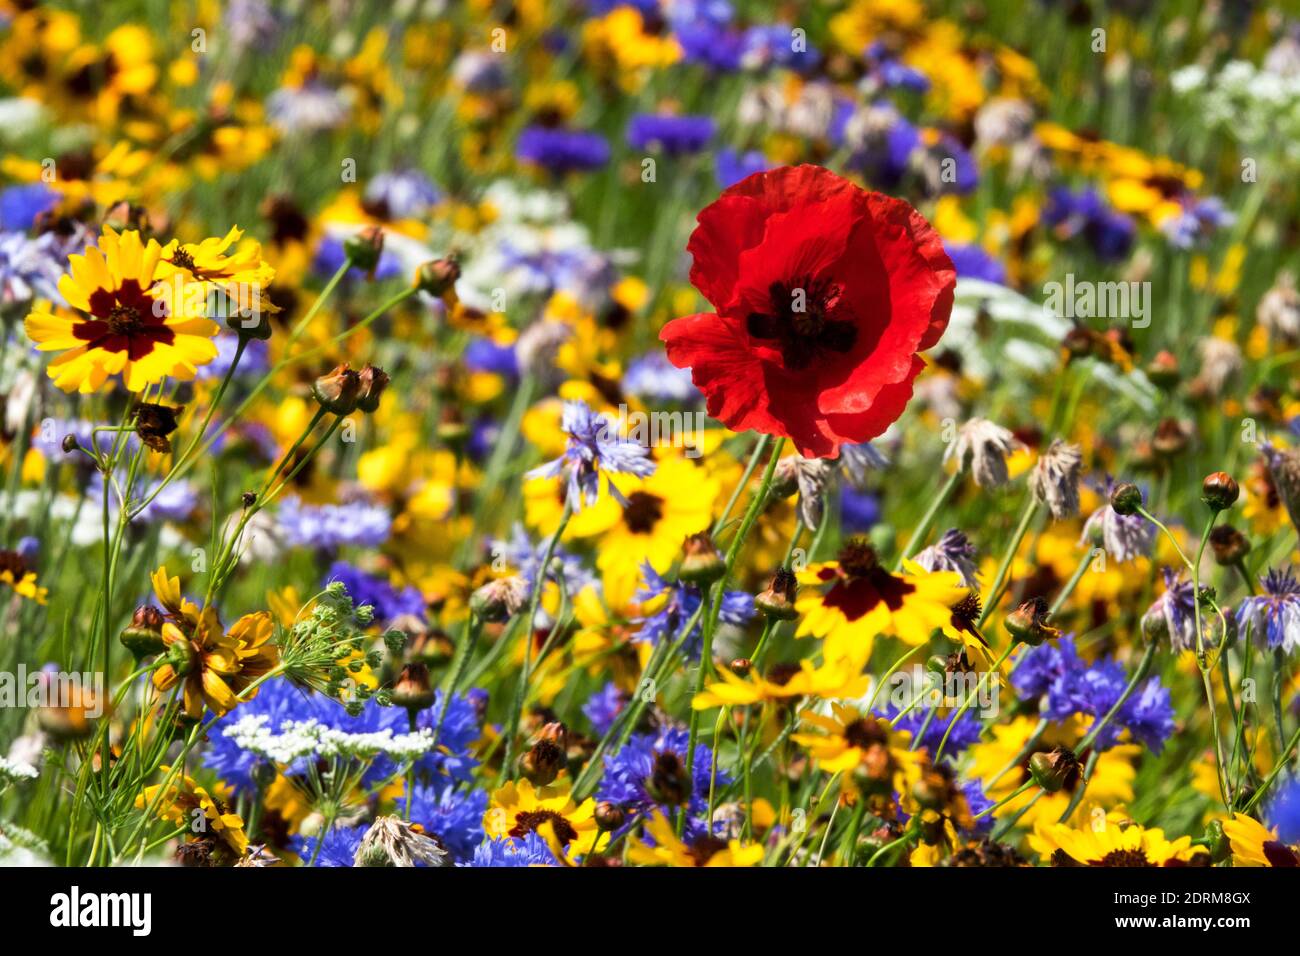 Pictorial Wild Flower meadow Red Poppy Yellow blue Flowers Meadow Papaver rhoeas Flower Summer Colorful Garden Mixed Flowers Red Papaver Flowering Mix Stock Photo